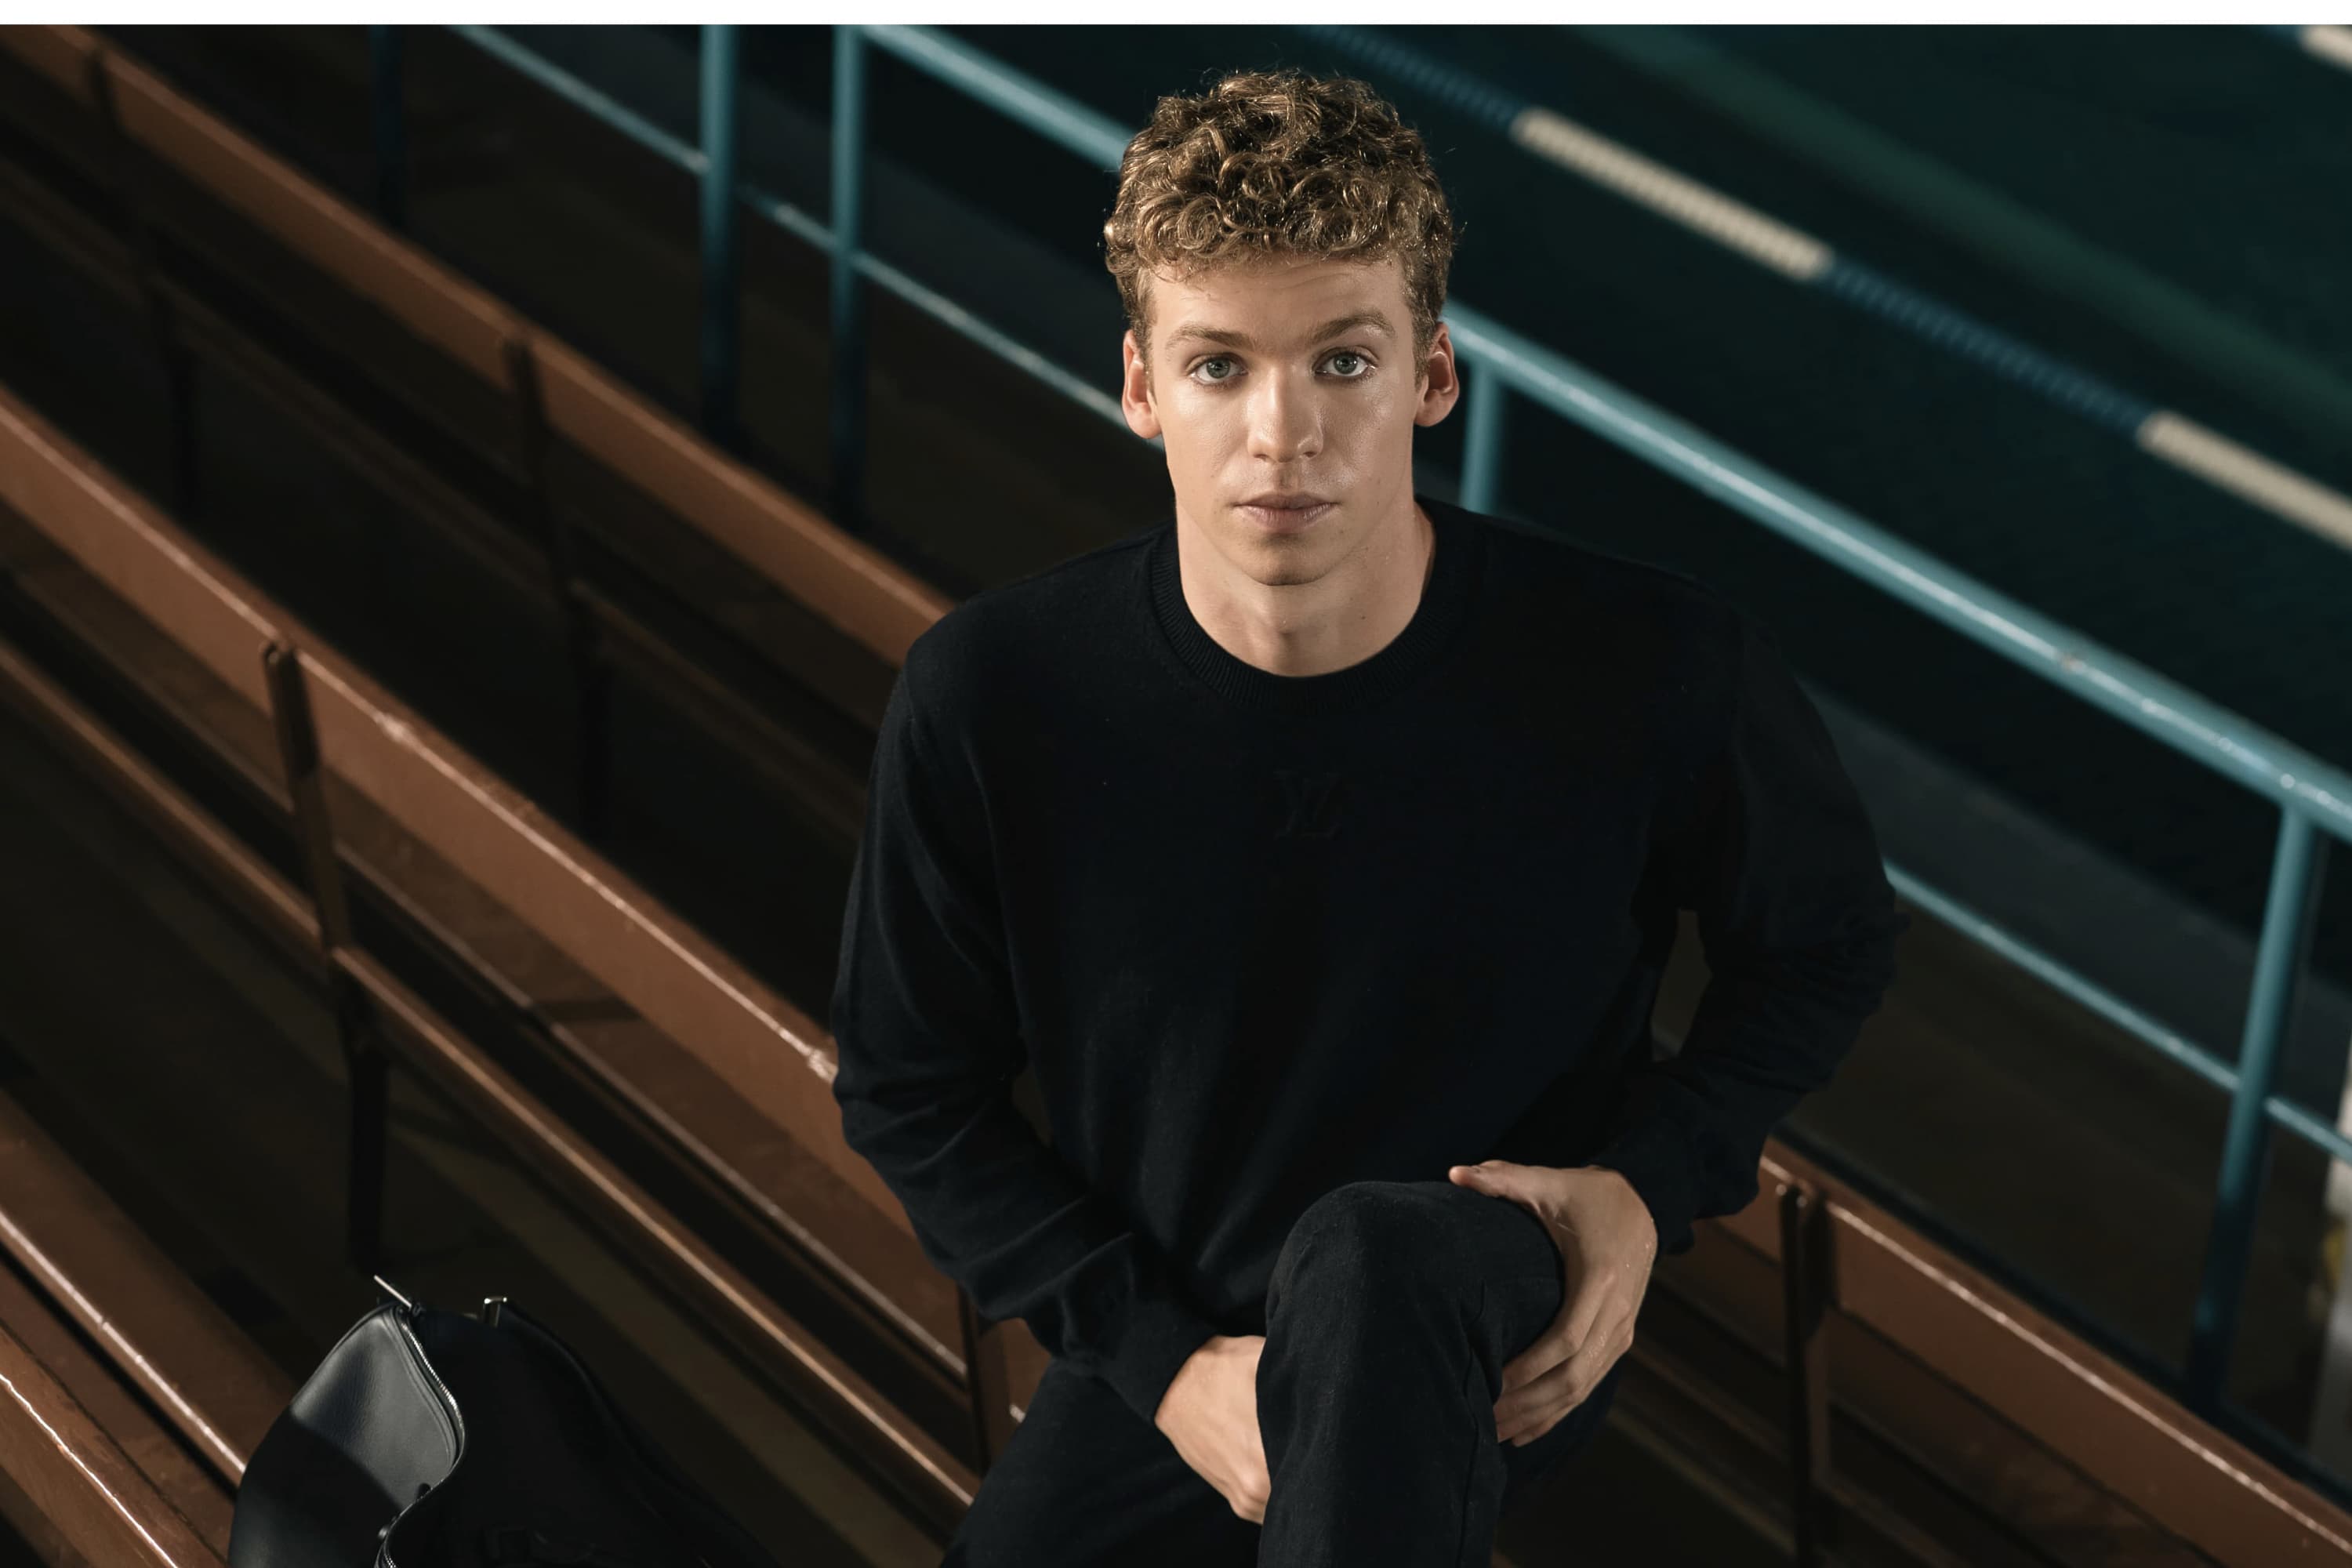 Louis Vuitton Announces Léon Marchand as House Ambassador Ahead of Paris  2024 Olympic and Paralympic Games